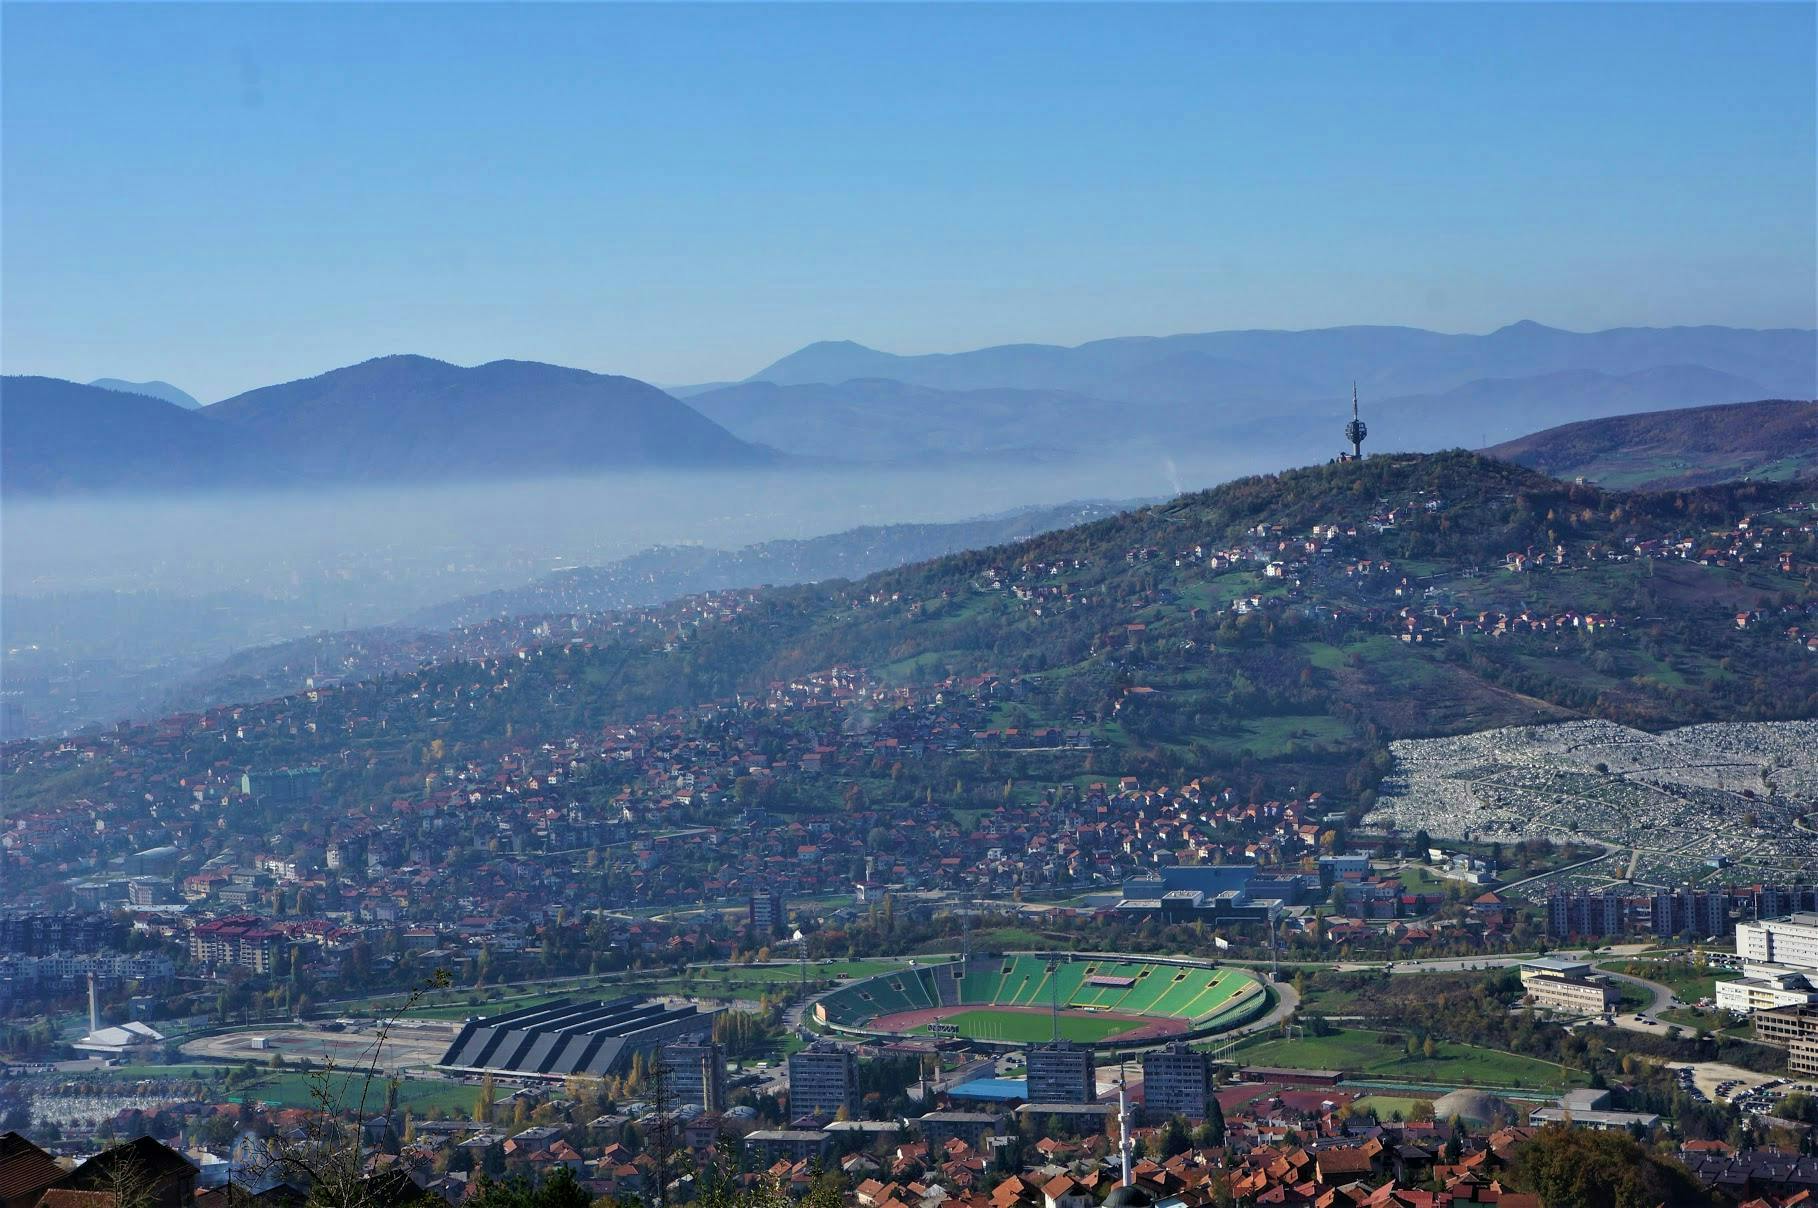 Morning mist over the city, seen from Grdonj hill.